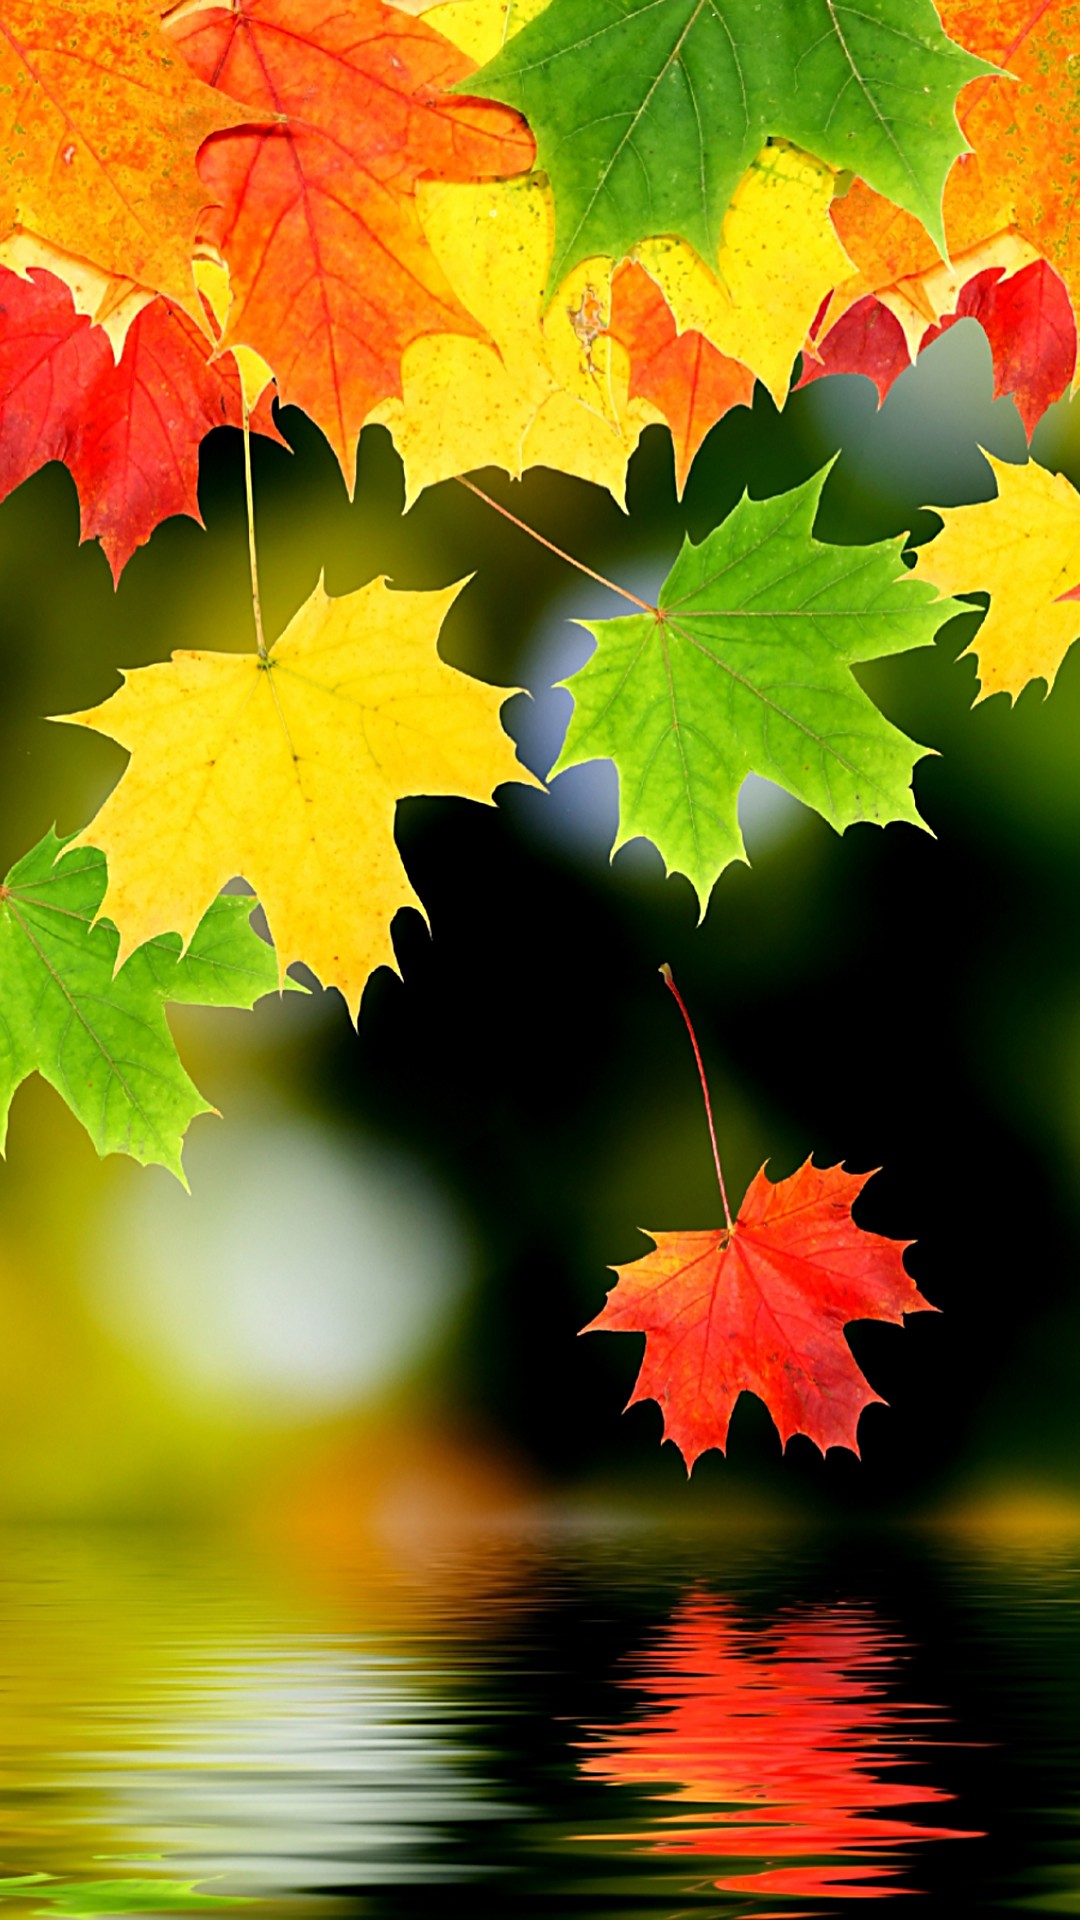 Colorful Leaves Wallpaper - KoLPaPer - Awesome Free HD Wallpapers